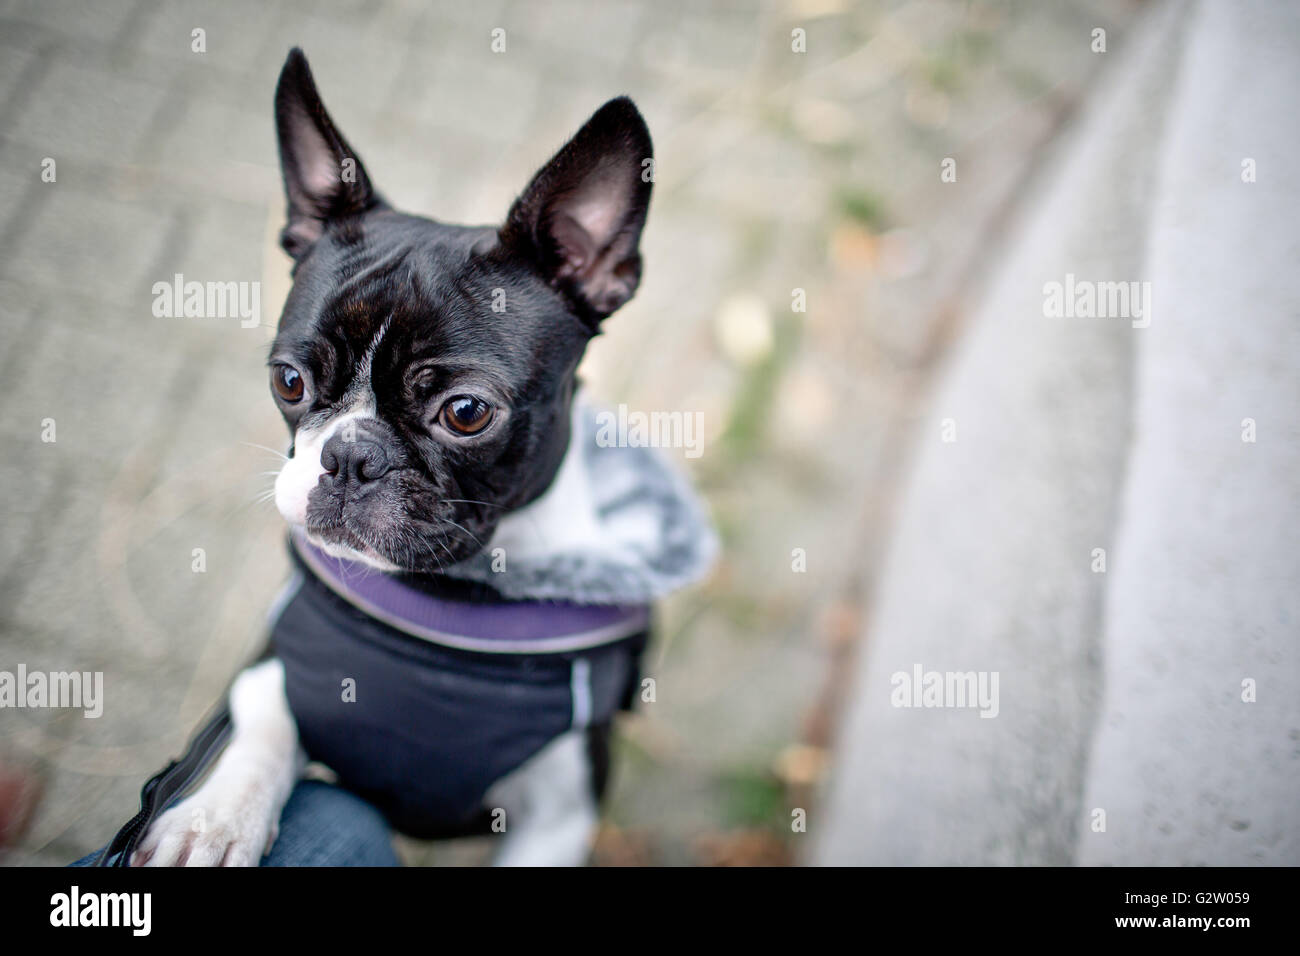 Boston Terrier equipped with warm jacket during a walk in autumn on a cold day Stock Photo